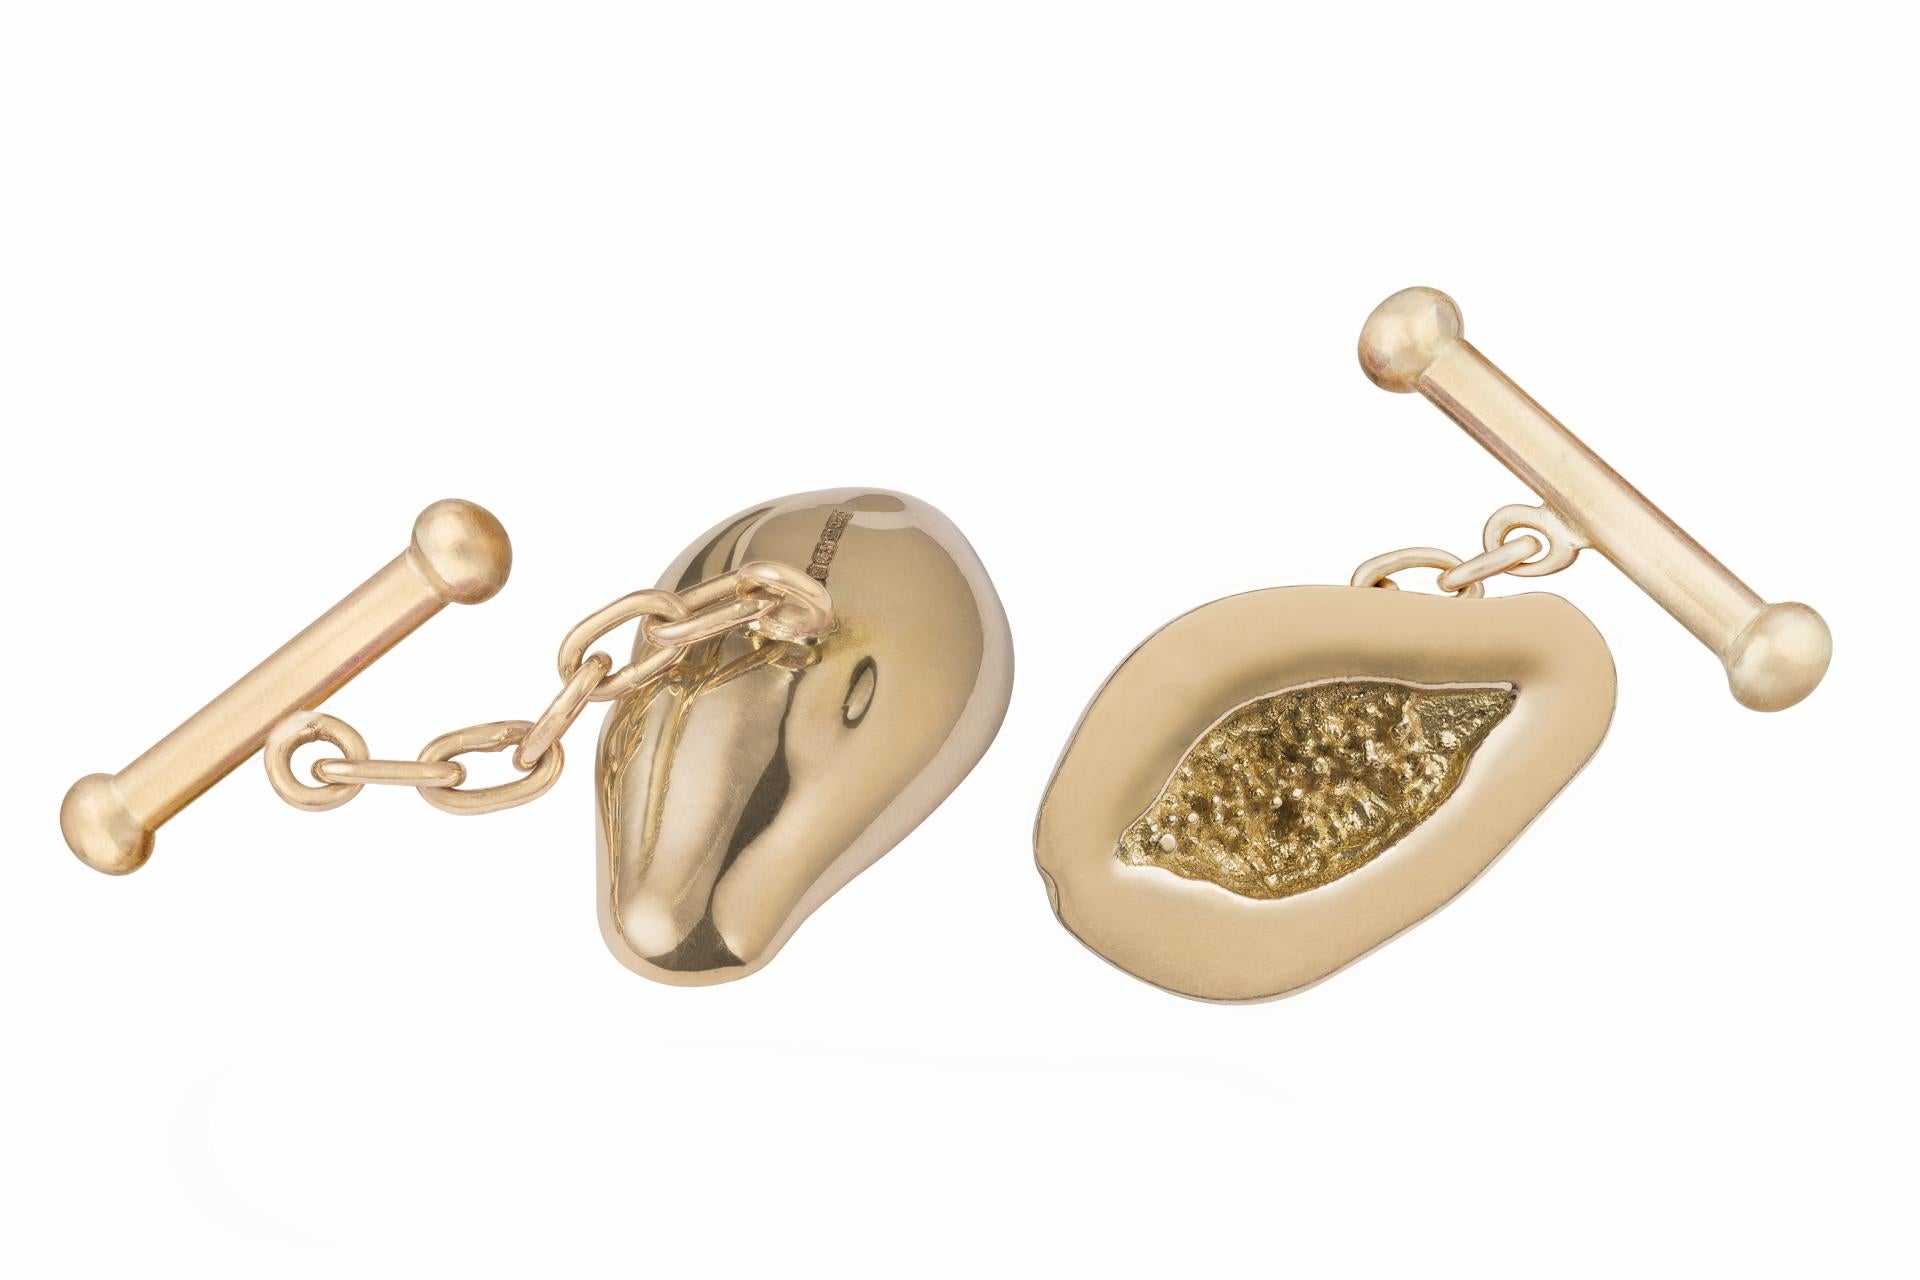 Gold, 18k, papaya cufflinks with a chain and bar.

If these are out of stock they are made to order and take 4 to 6 weeks. 

OUROBOROS is an artisanal brand, based out of Jaipur and designed by the British designer, Olivia Young. Each piece is